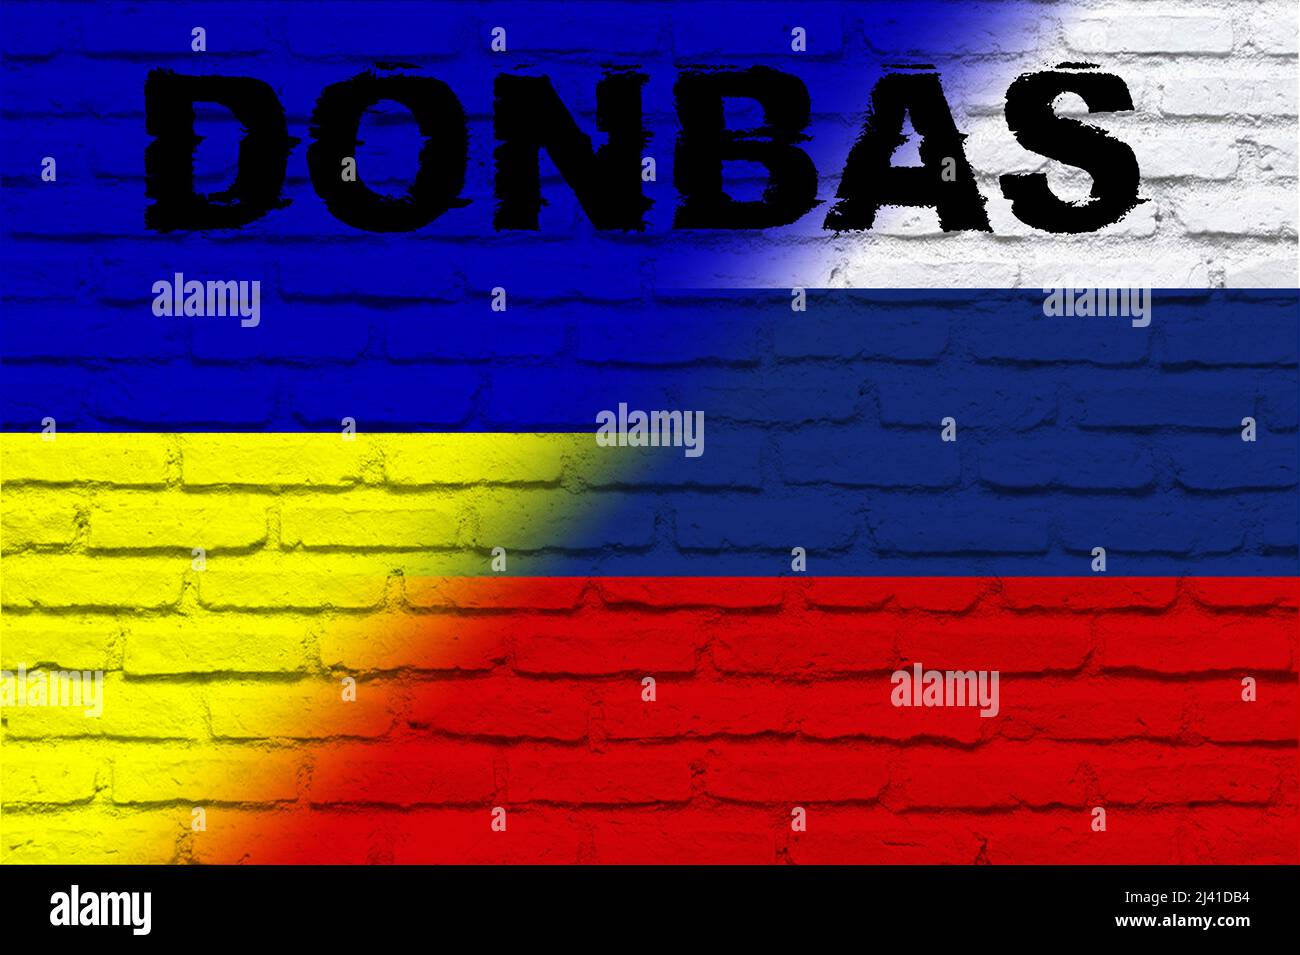 Donbas. Conflict between Ukraine and Russia. Image of the flag of Russia and the flag of Ukraine with the word Donbas written on it. Horizontal image Stock Photo